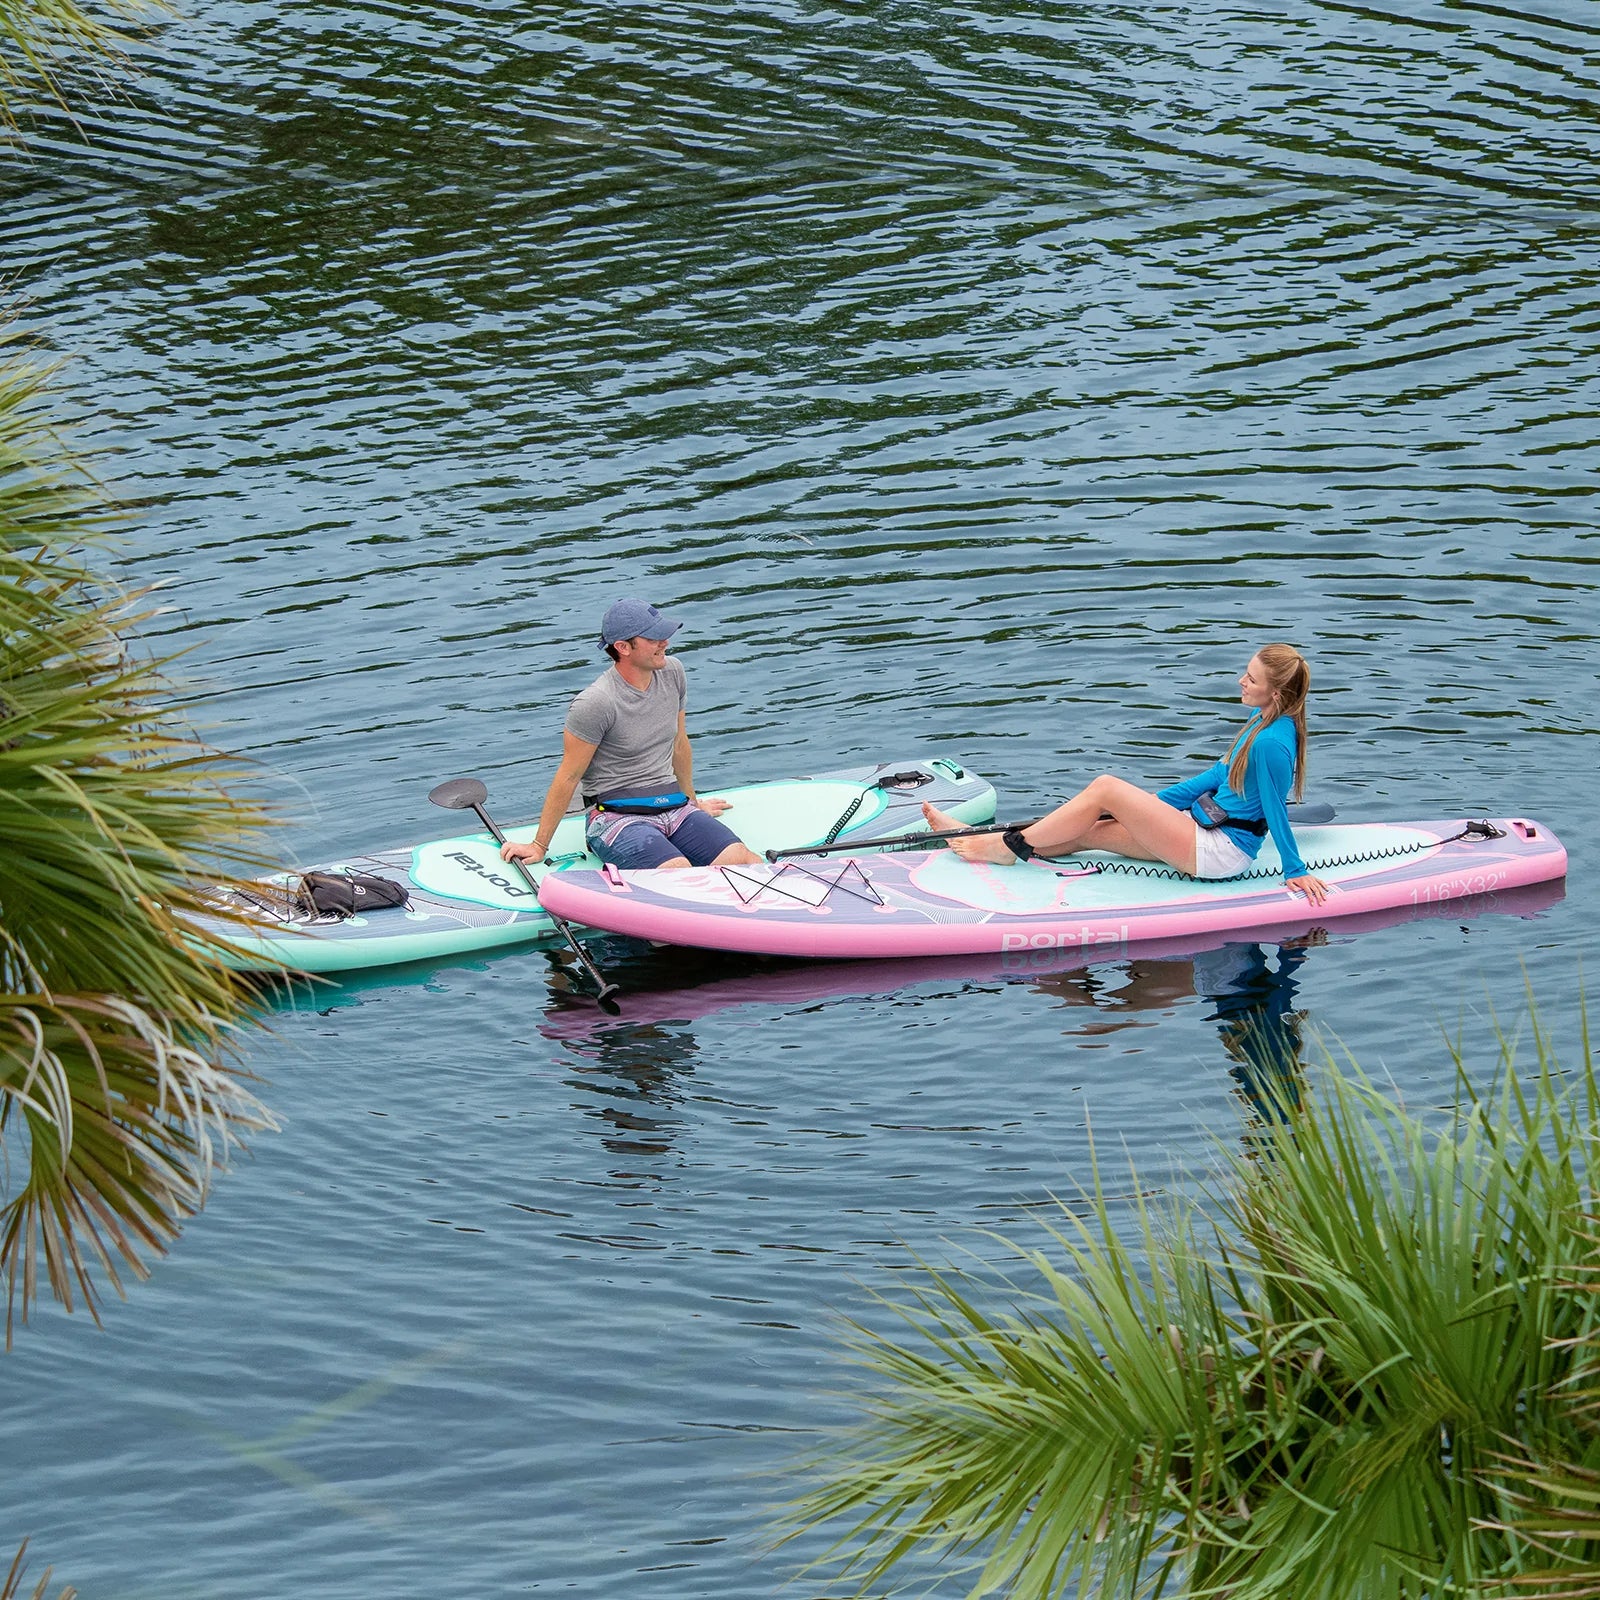 Top 8 Health Benefits of Stand-Up Paddle Boarding